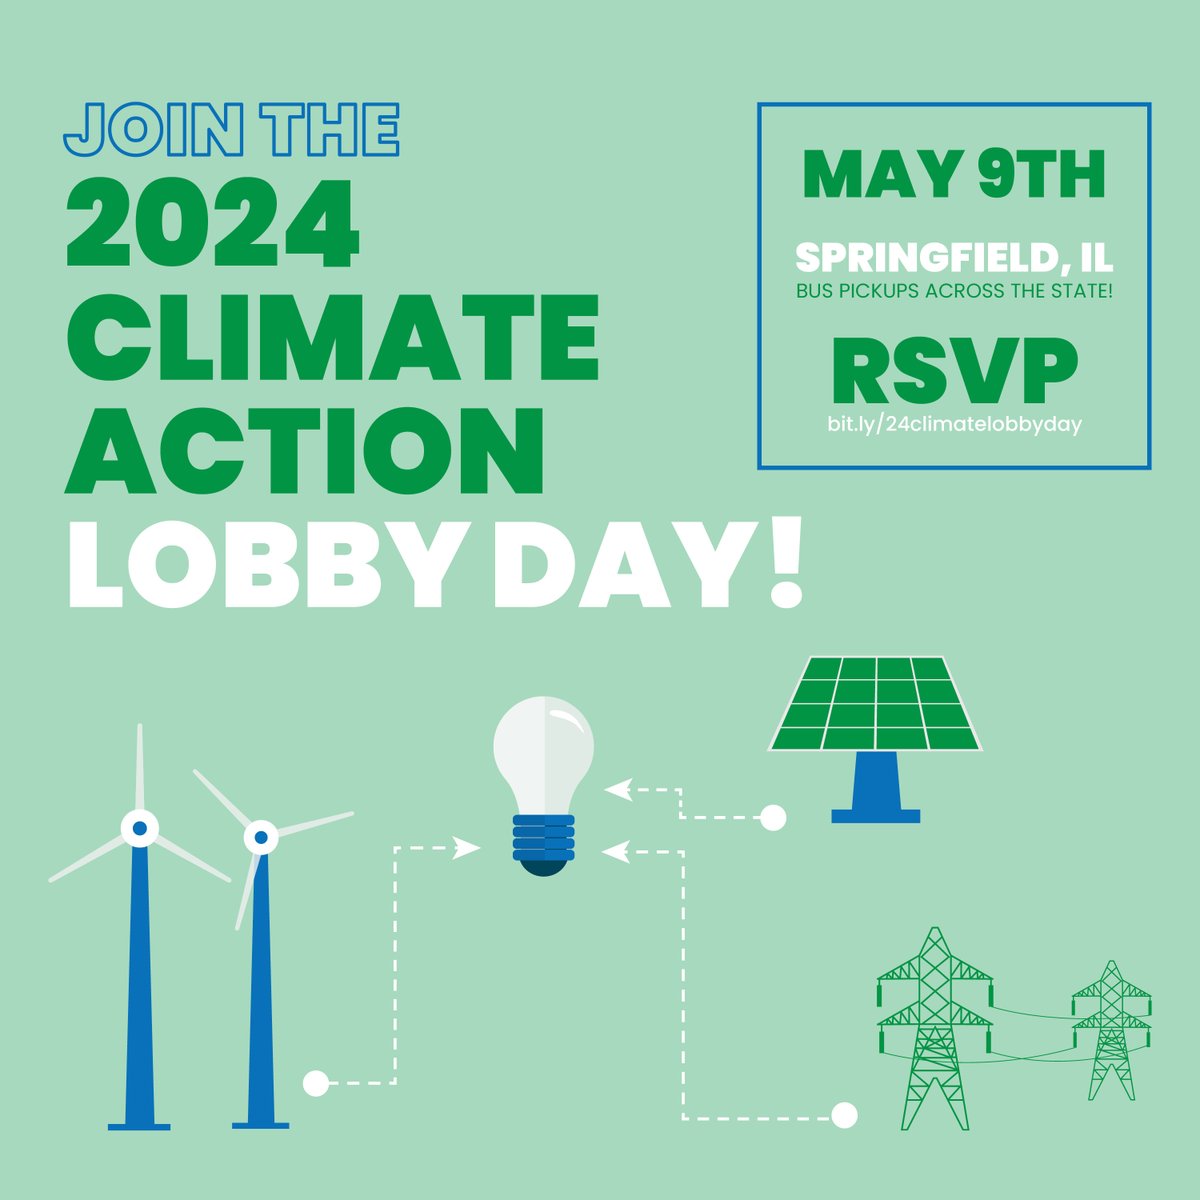 We want clean energy, & we want it yesterday! The Clean and Reliable Grid Act will accelerate our clean energy progress by upgrading our electric grid & requiring transparency & public participation for ALL utilities. Lobby for this bill on May 9: nature.ly/3xOX4jk